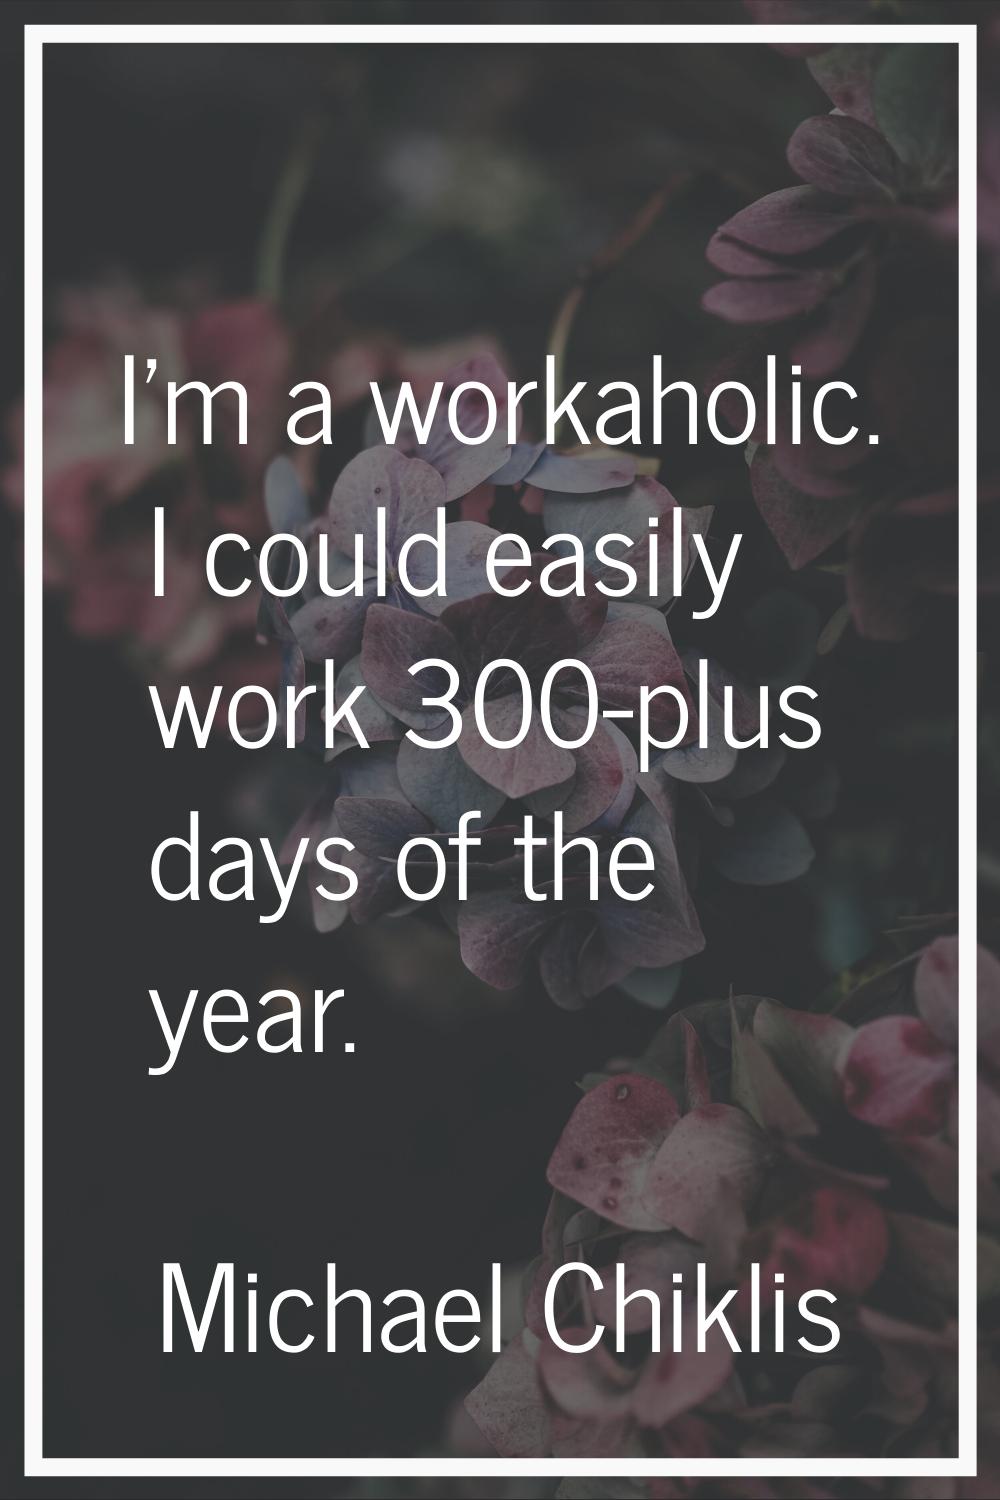 I'm a workaholic. I could easily work 300-plus days of the year.